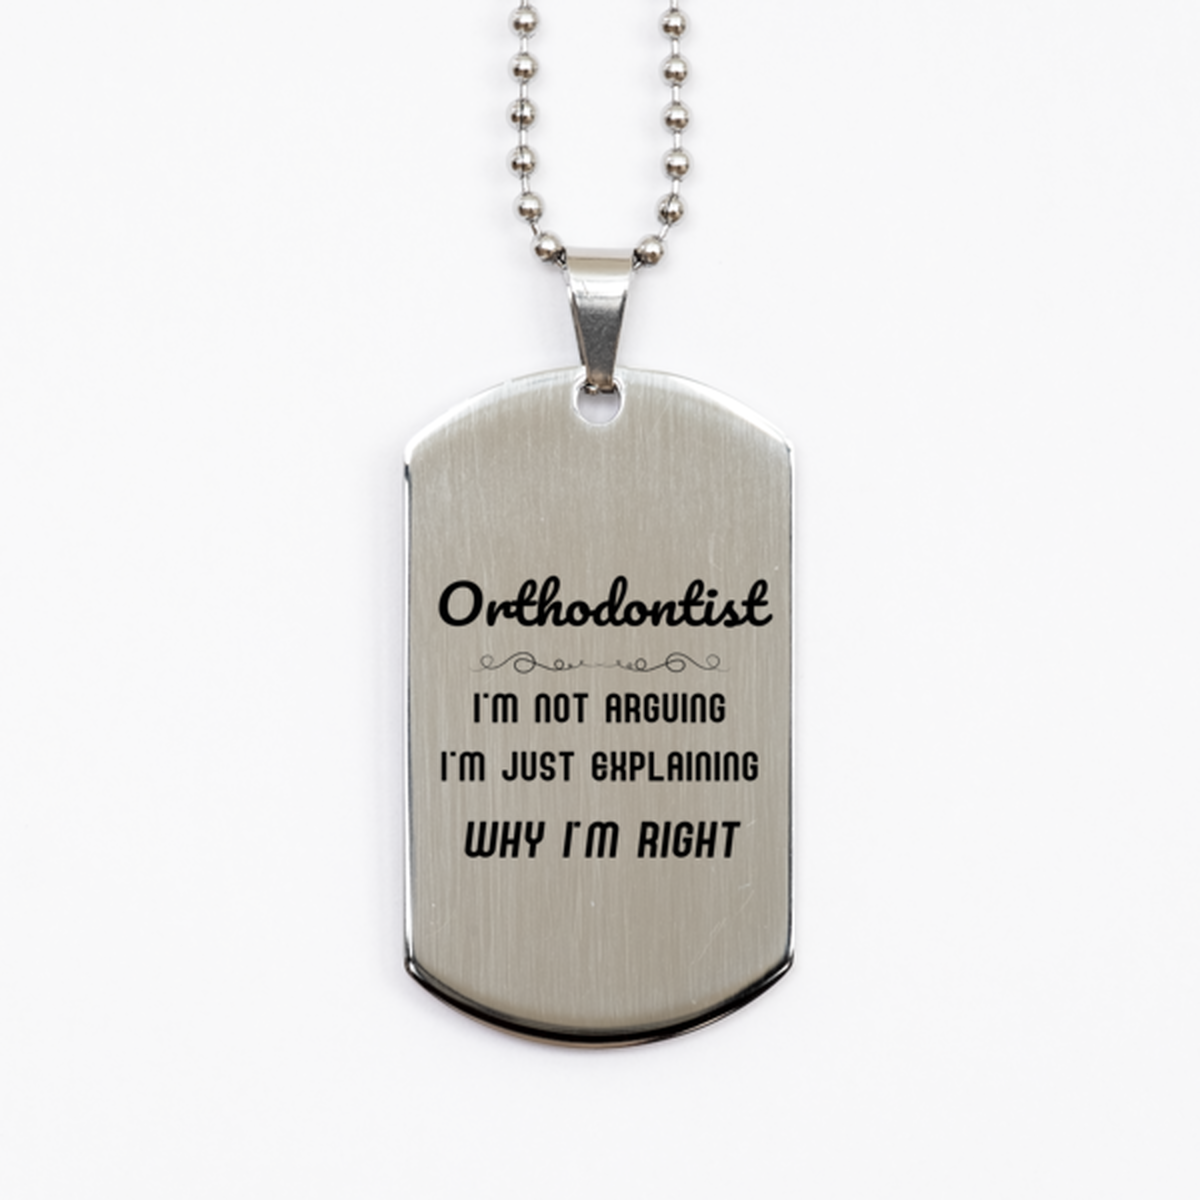 Orthodontist I'm not Arguing. I'm Just Explaining Why I'm RIGHT Silver Dog Tag, Funny Saying Quote Orthodontist Gifts For Orthodontist Graduation Birthday Christmas Gifts for Men Women Coworker